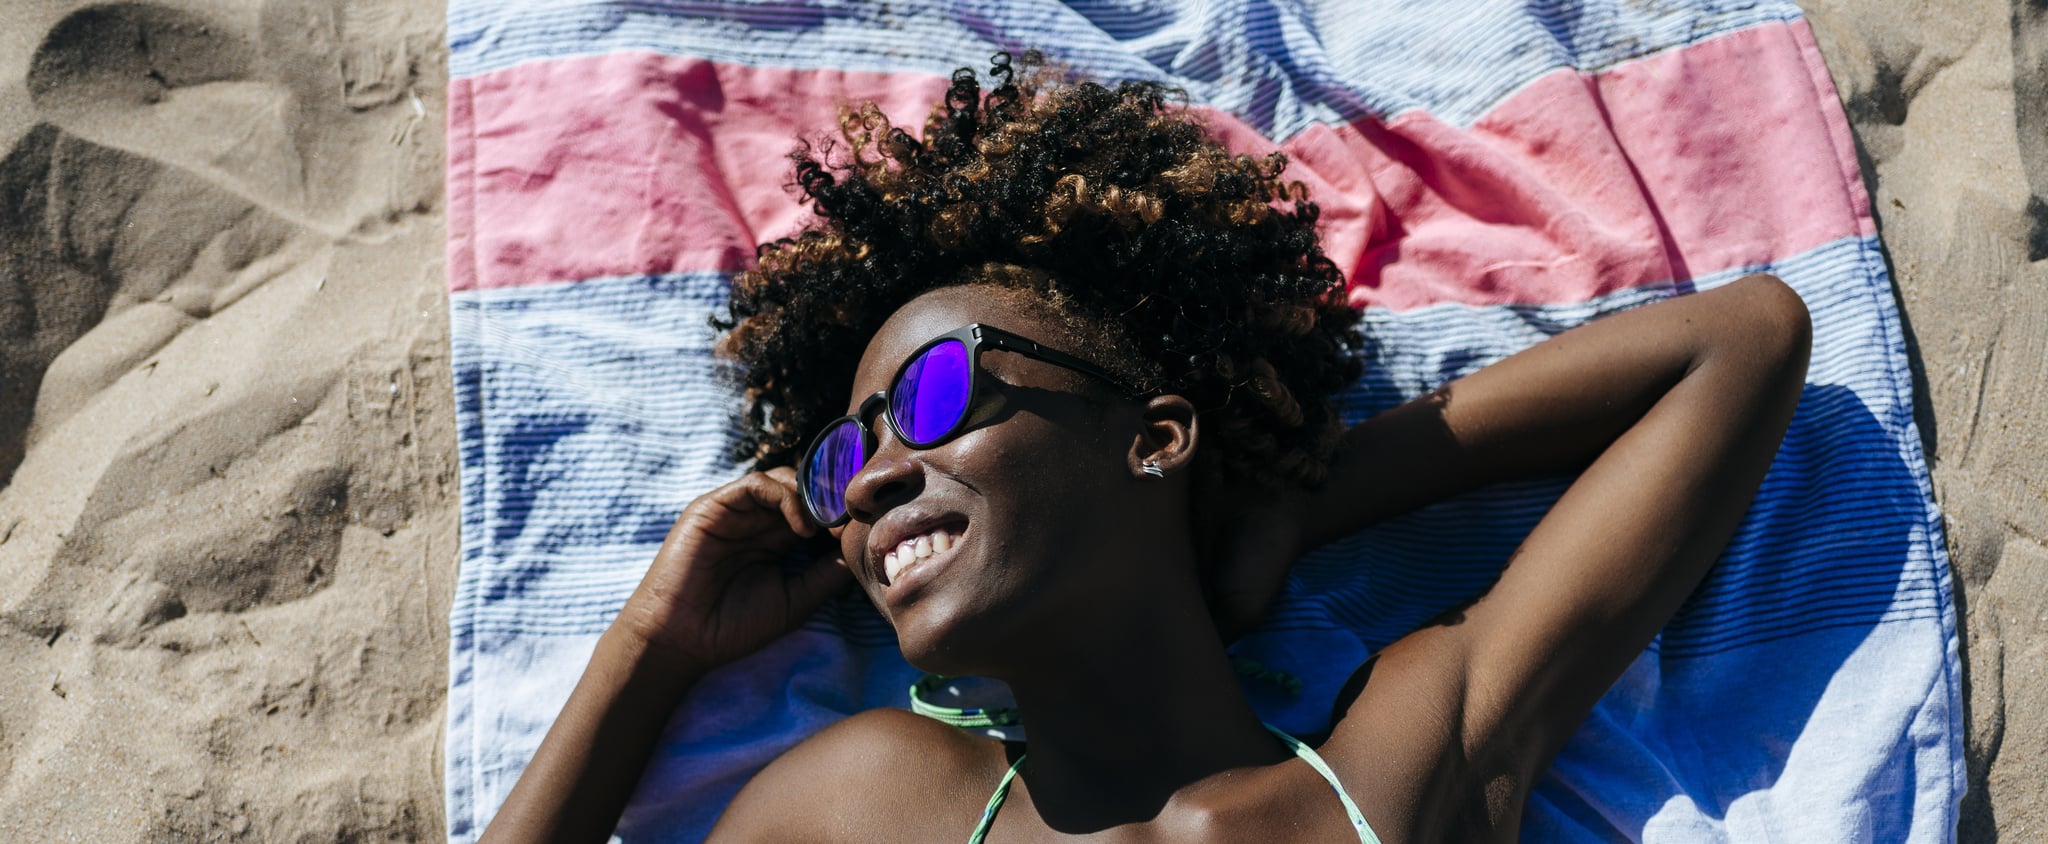 7 Best Sunscreens For Your Head & Scalp According to Experts